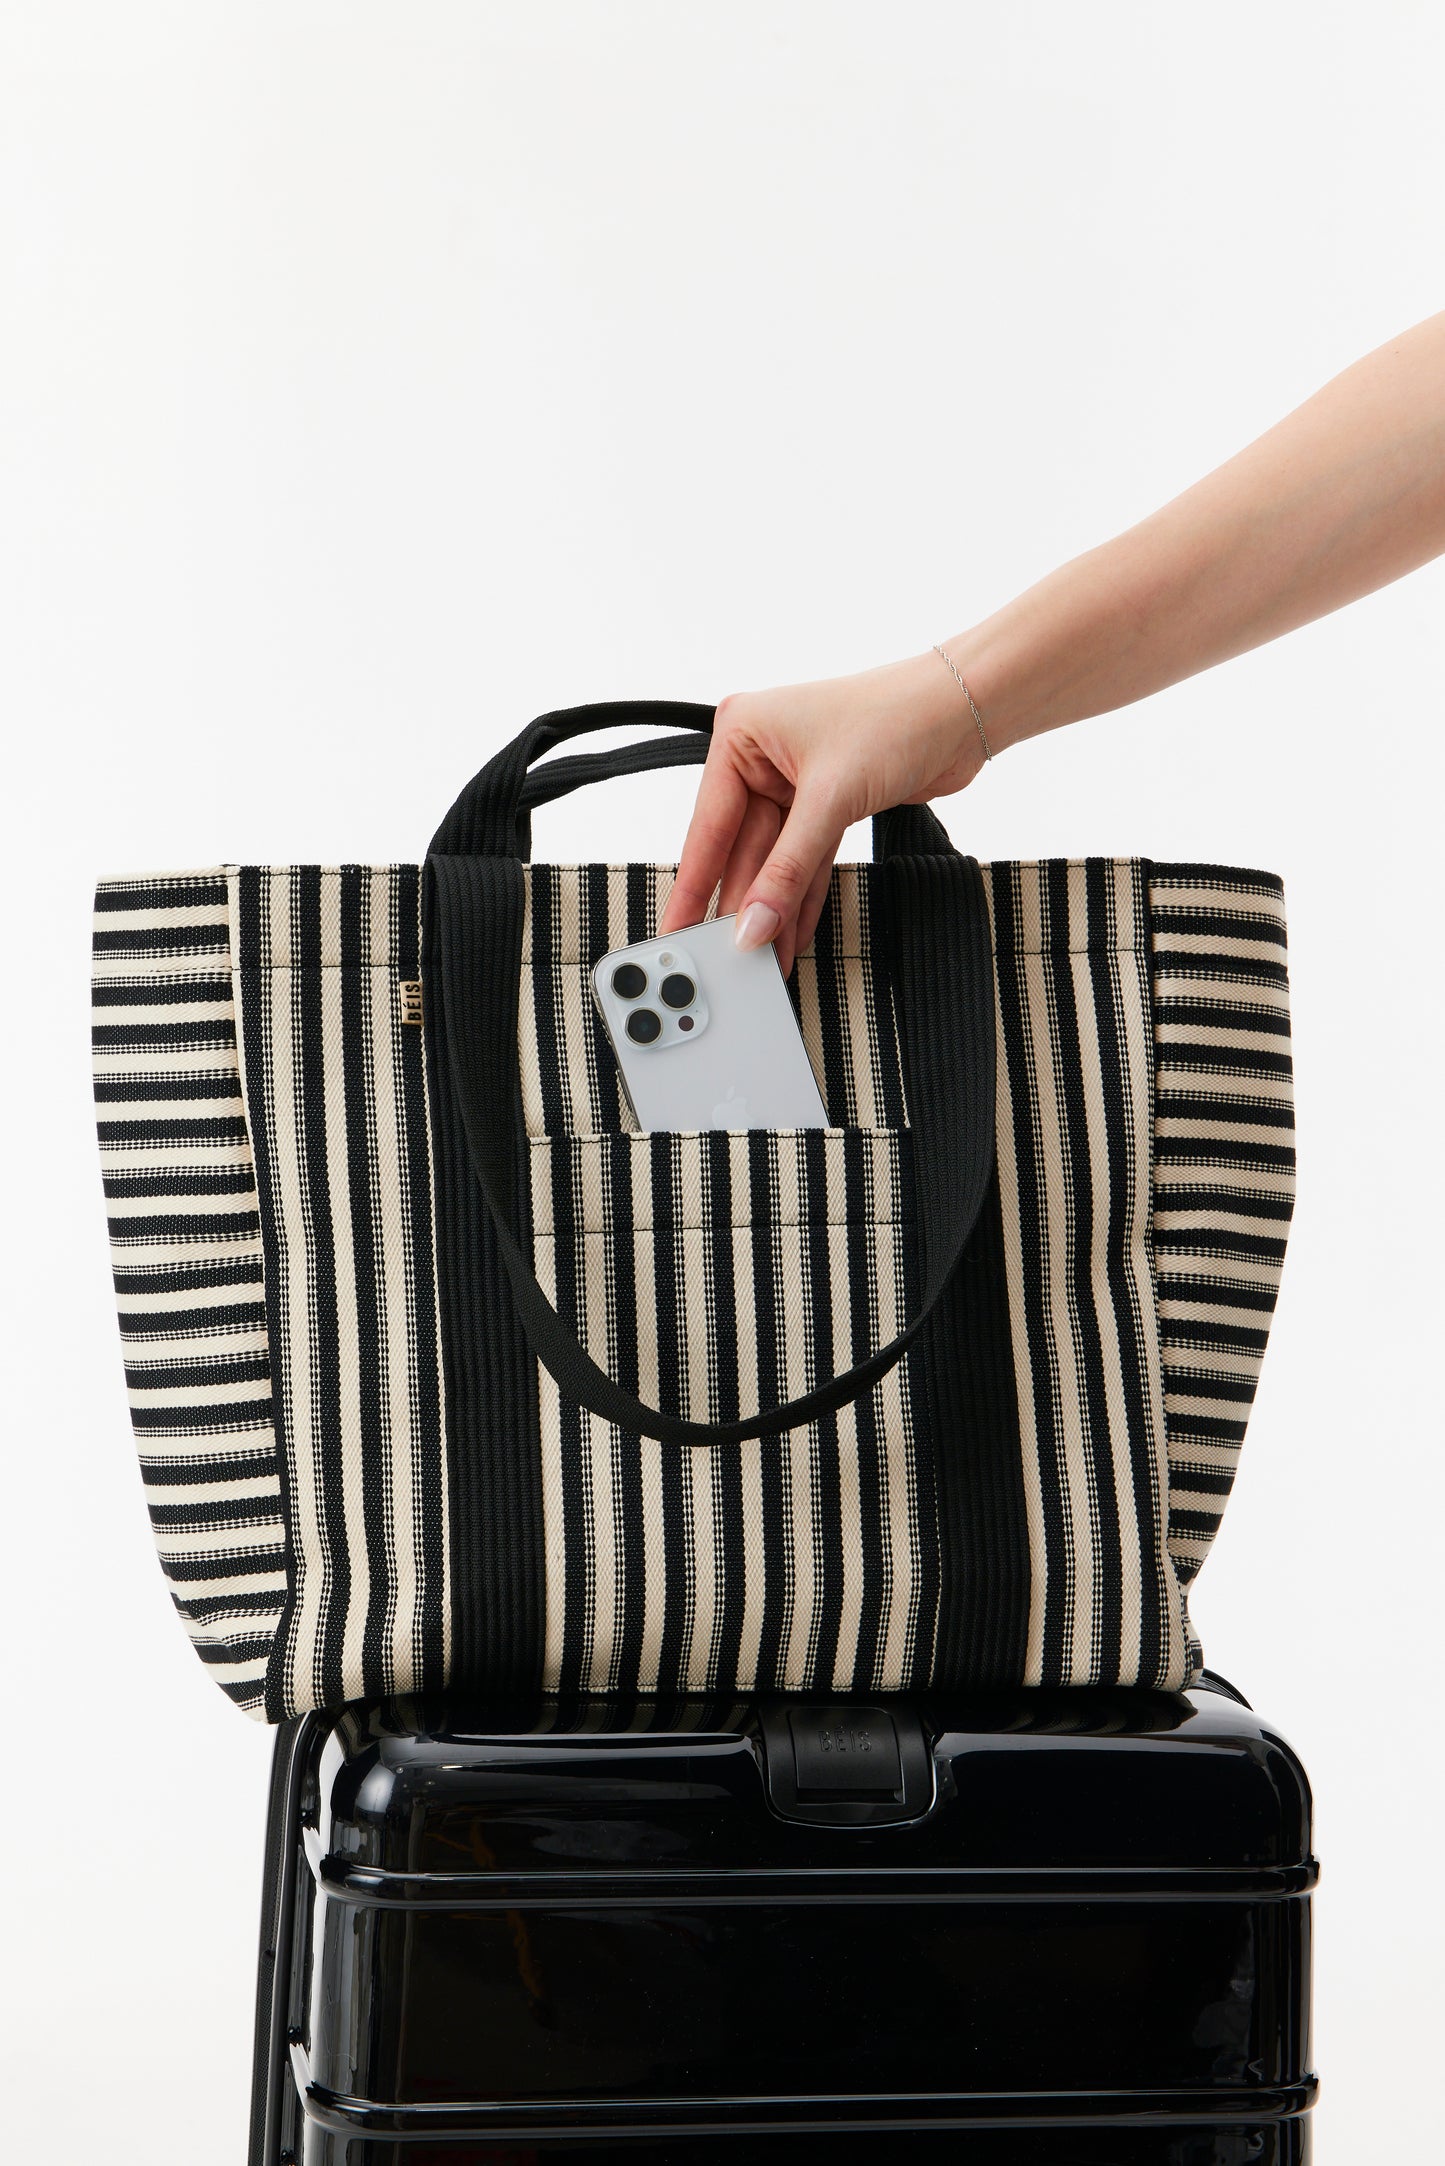 The Vacation Tote in Black Stripe